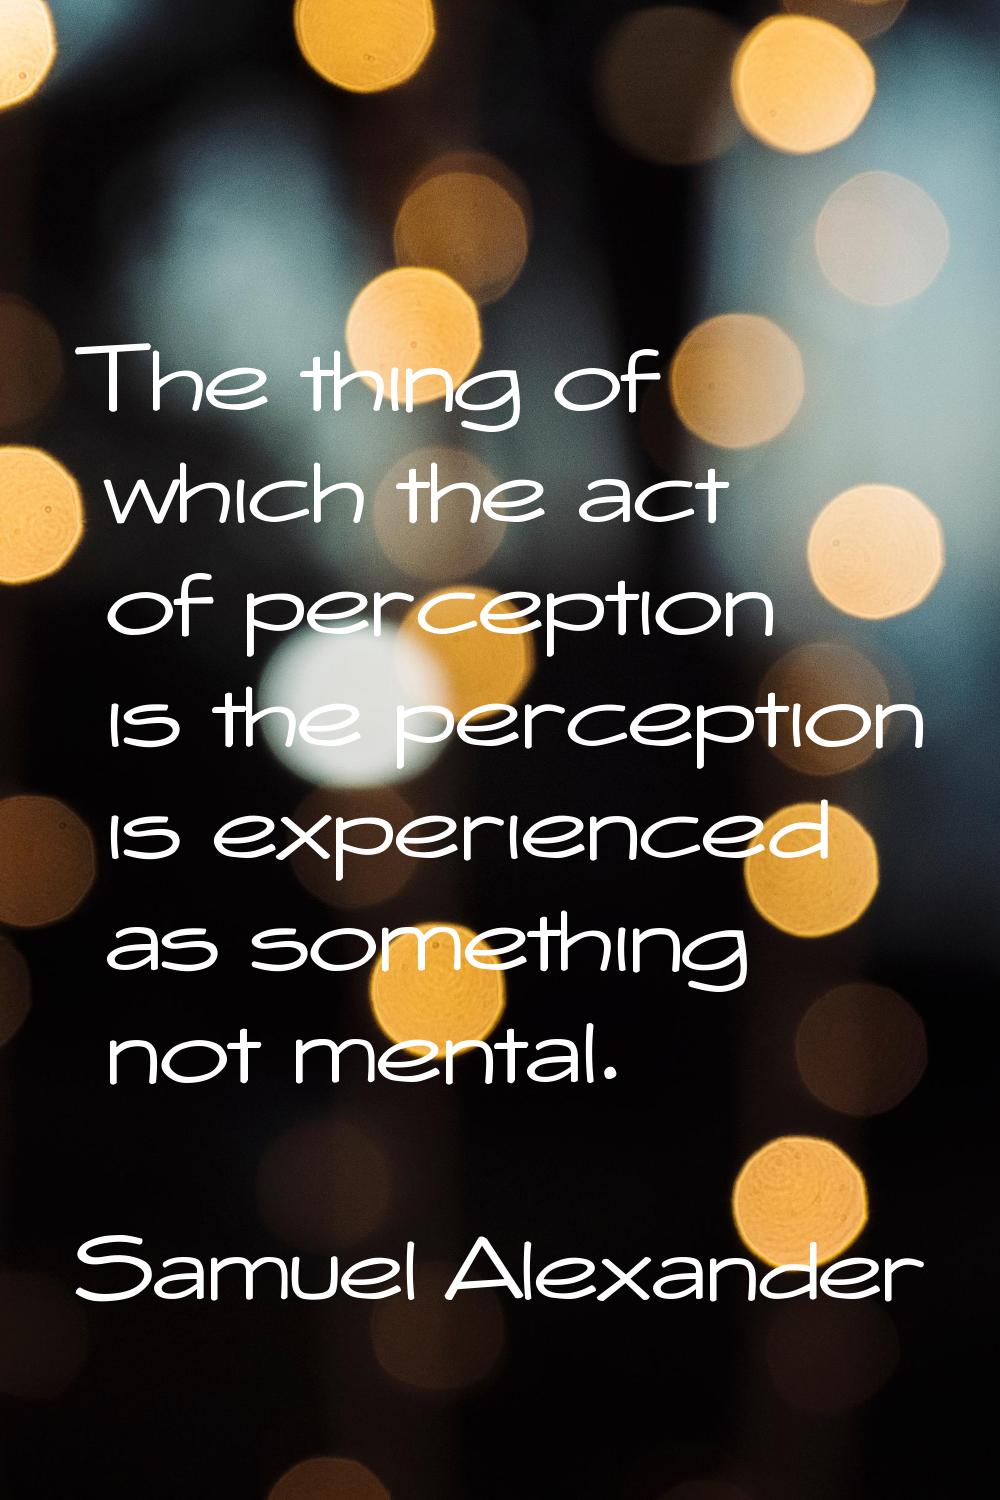 The thing of which the act of perception is the perception is experienced as something not mental.